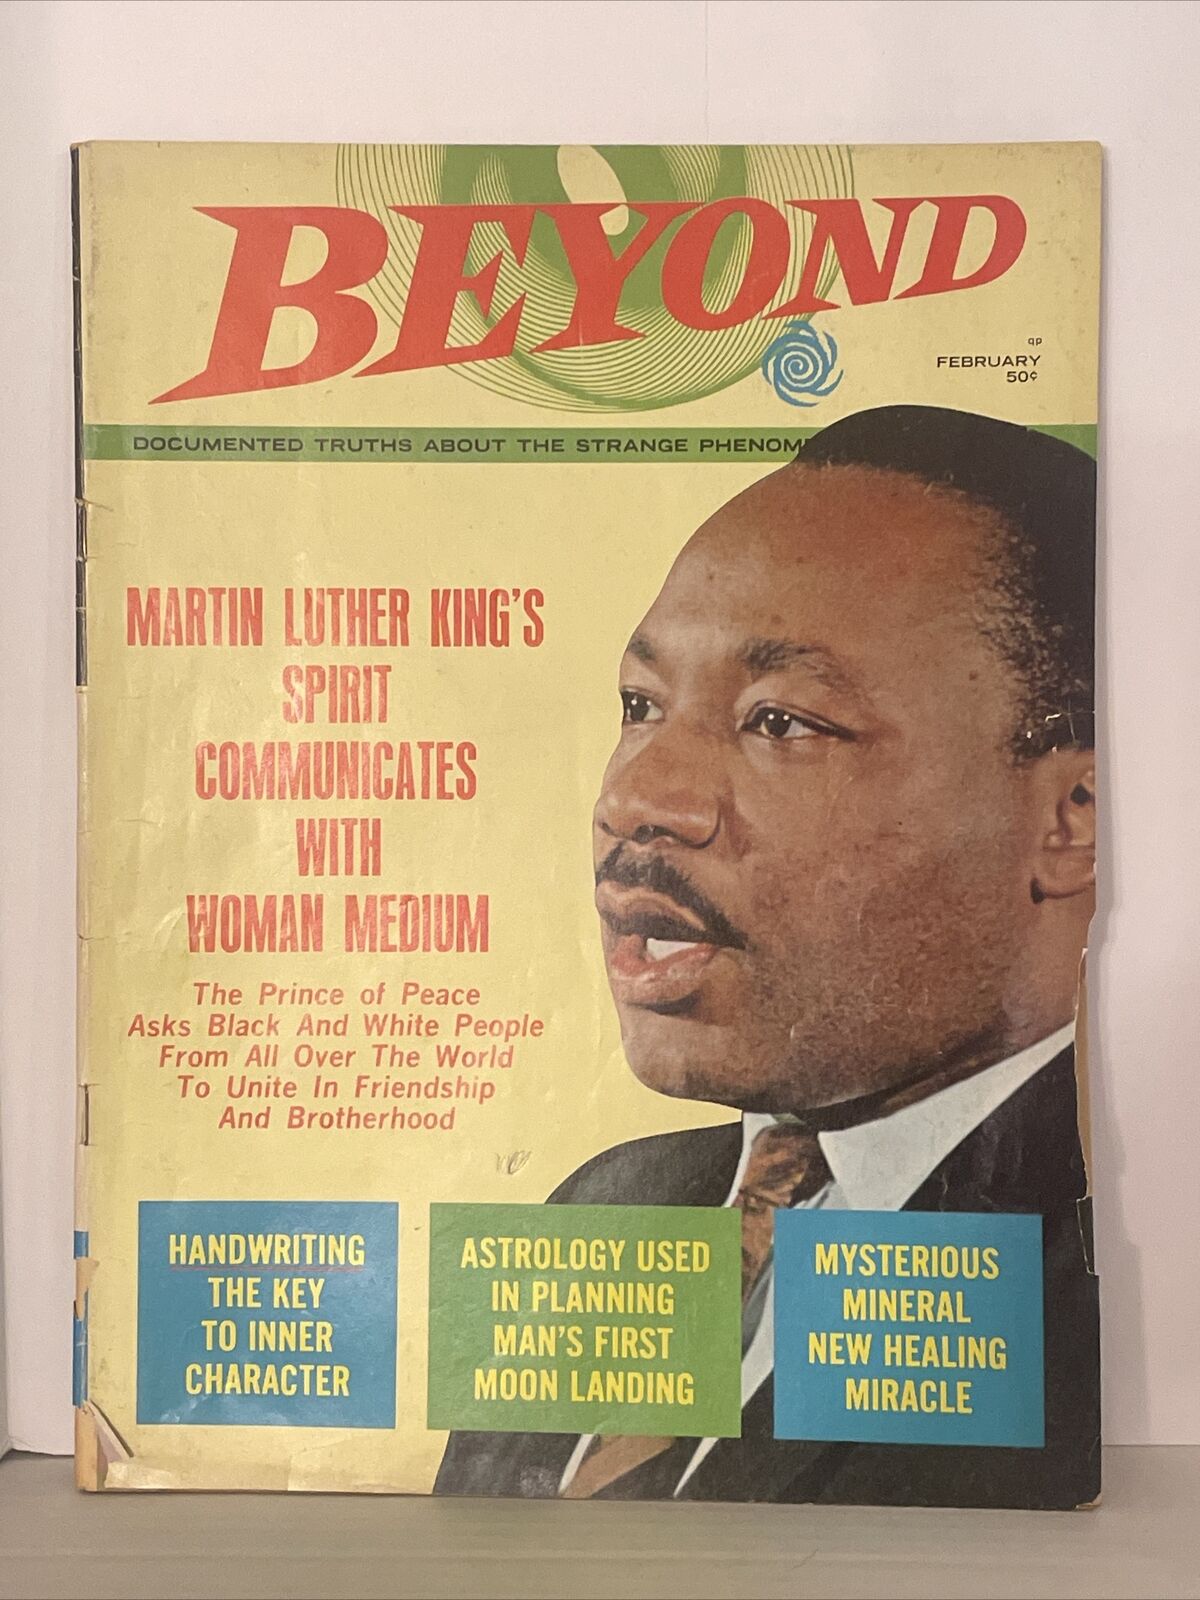 Beyond Magazine February 1970 Martin Luther King Jr Issue  Vol 3 Number 18